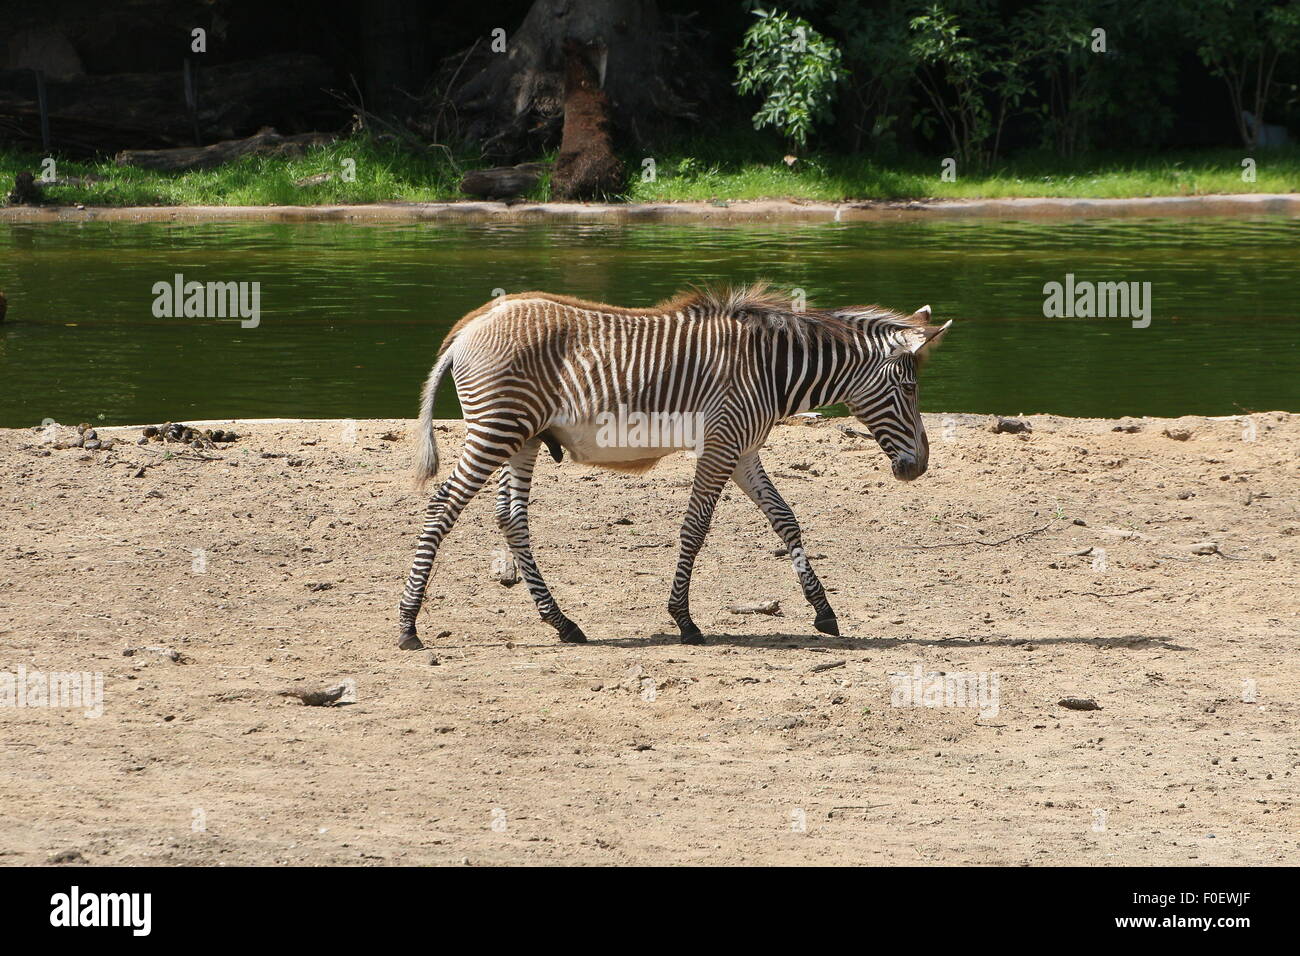 East African Grévy's zebra or Imperial zebra (Equus grevyi) at Dierenpark Amersfoort Zoo, The Netherlands Stock Photo